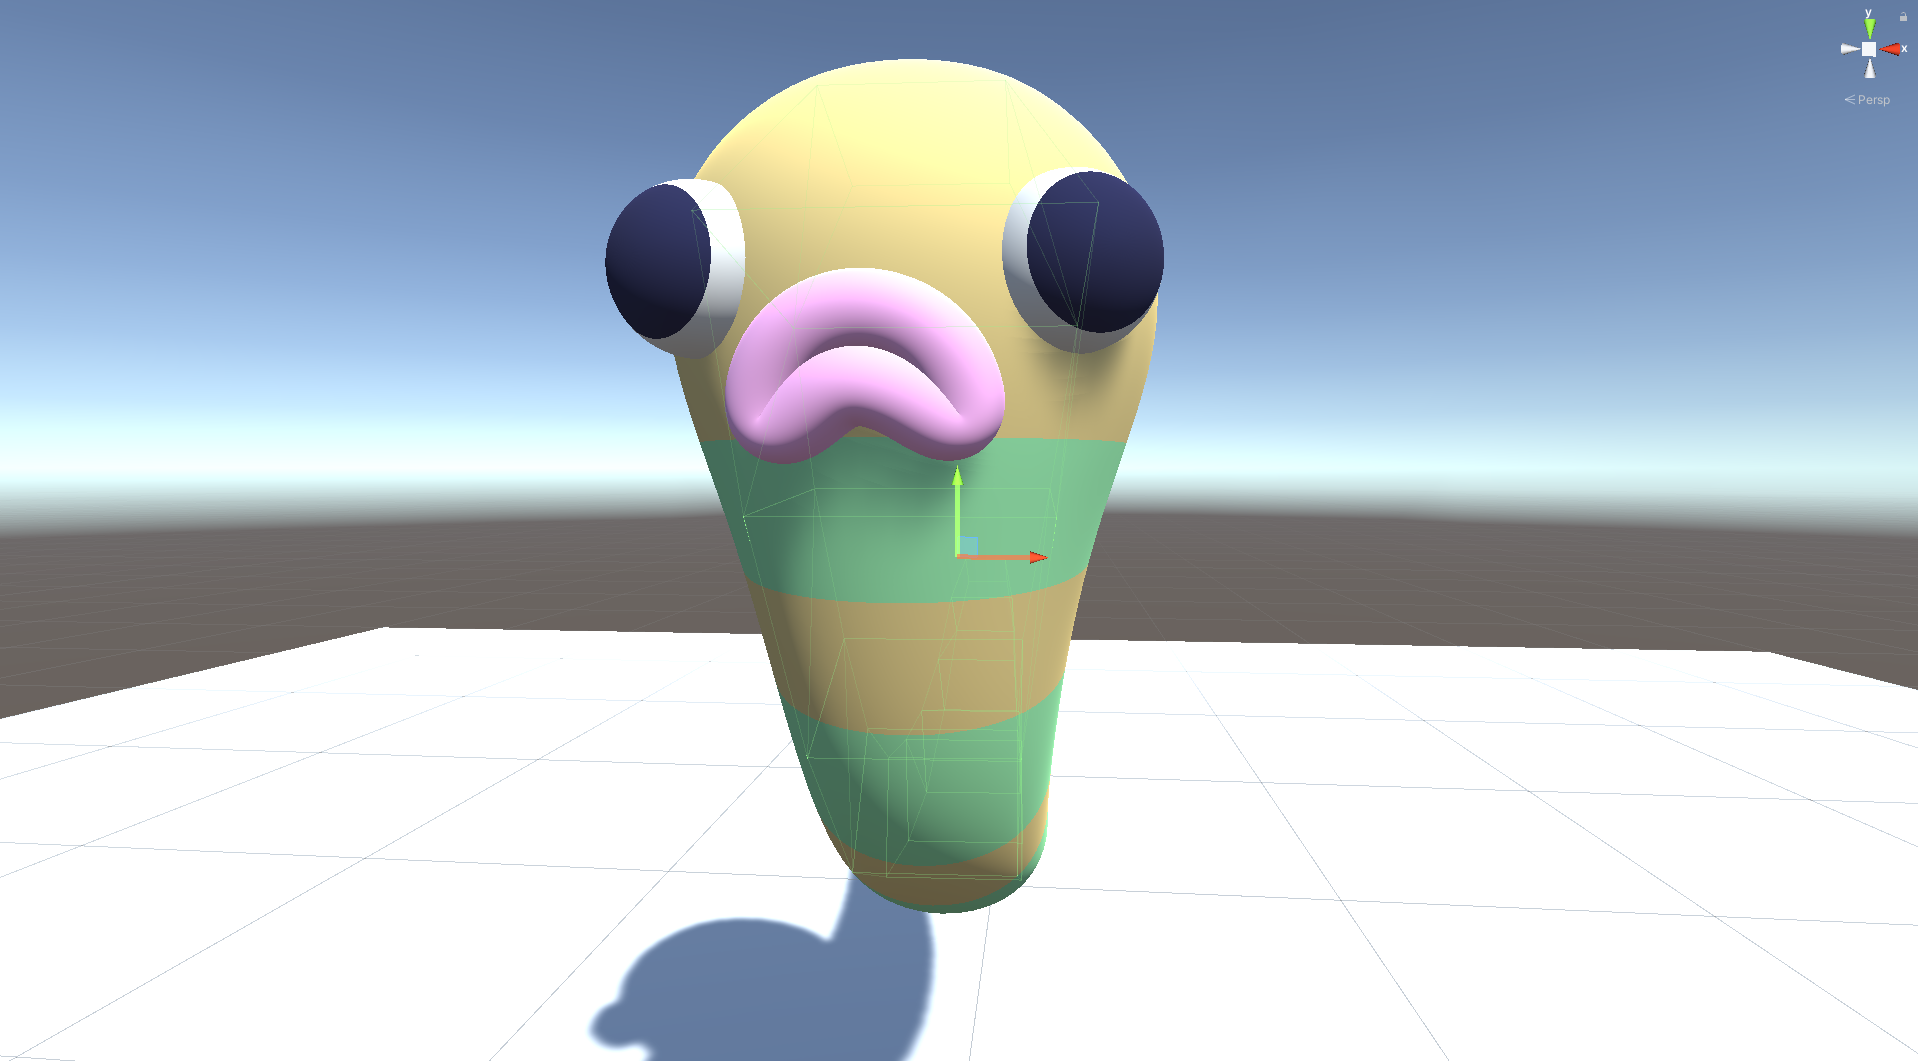 Simplified Collision Worm